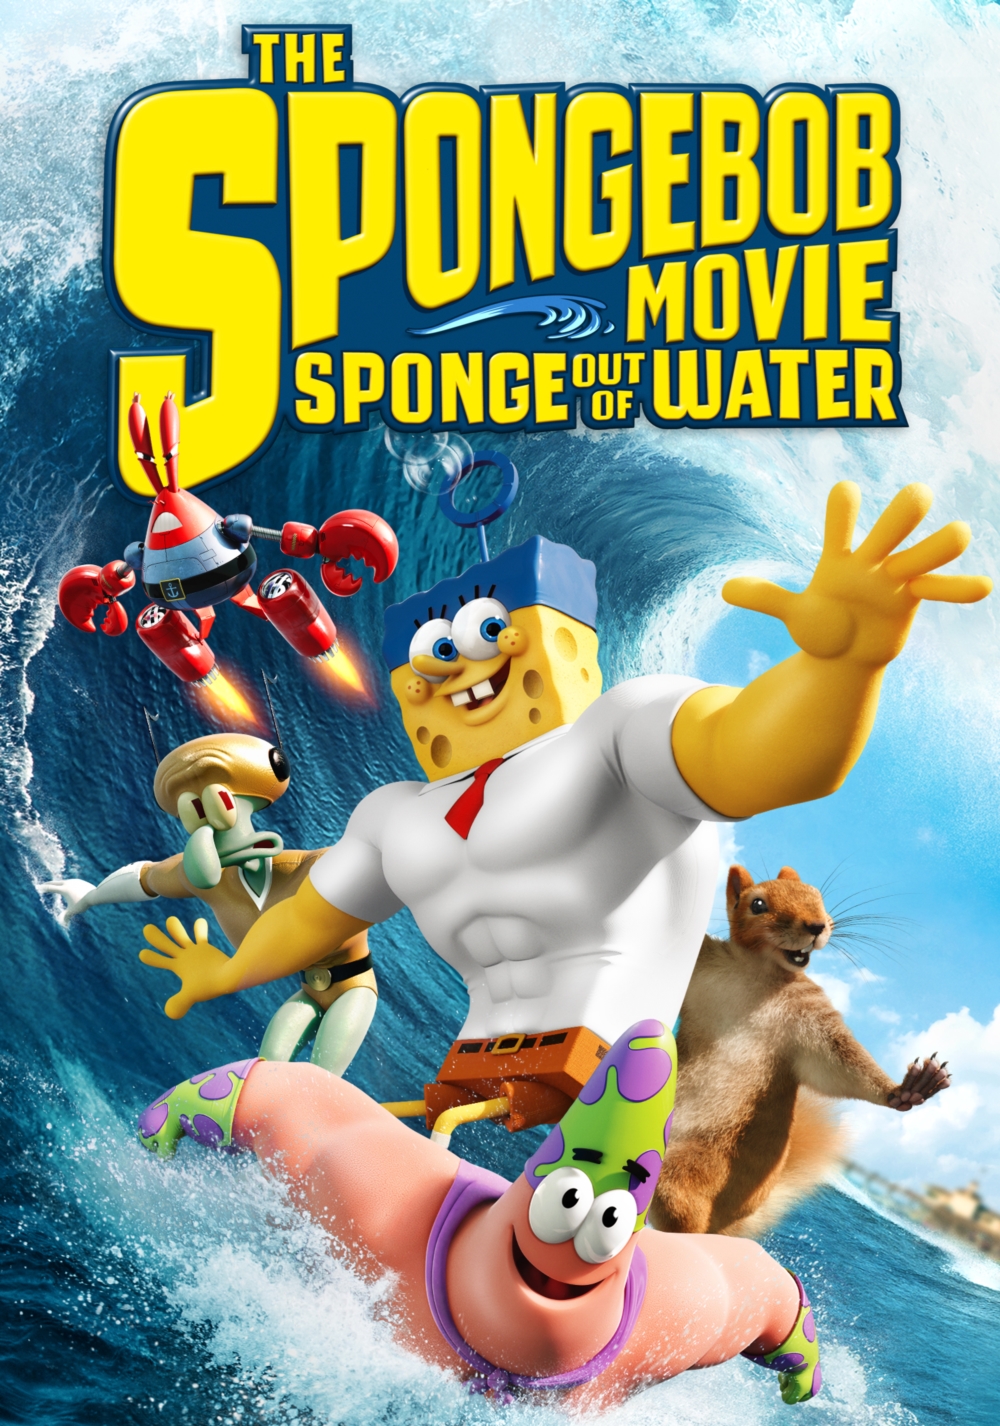 The SpongeBob Movie: Sponge Out of Water Movie Poster - ID: 126450 - Image ...